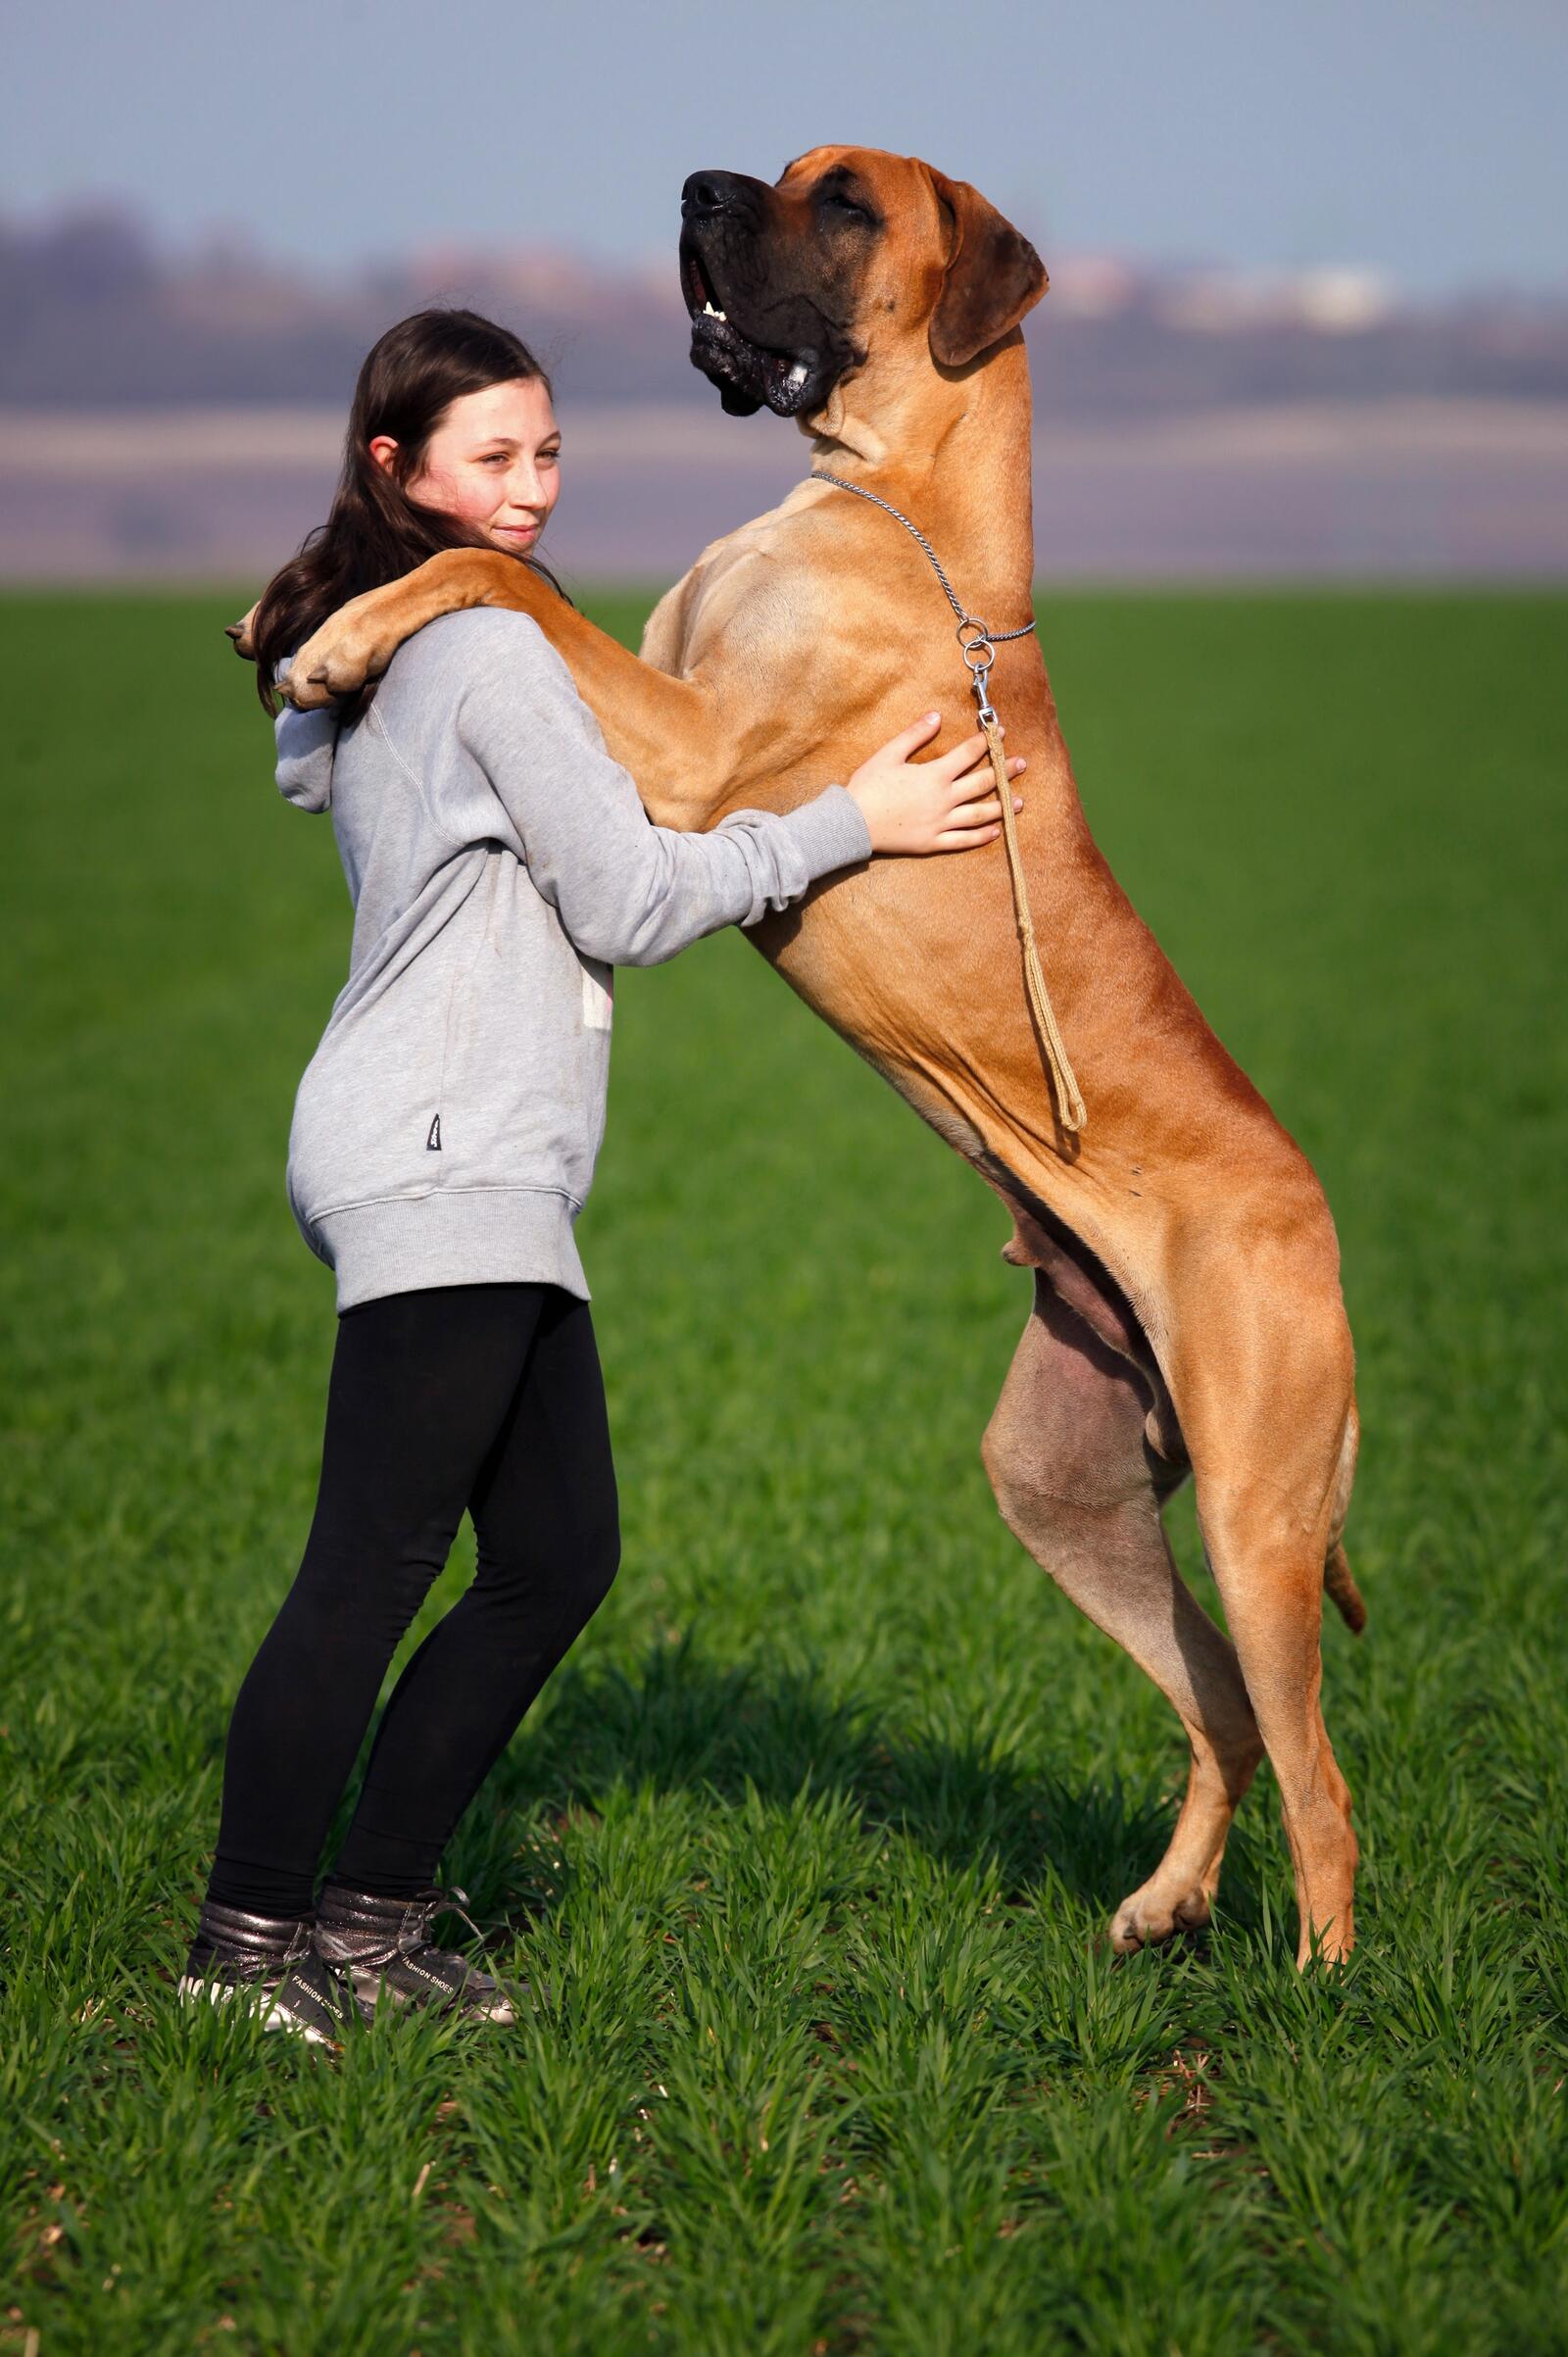 Free photo A girl and a big dog standing in an embrace